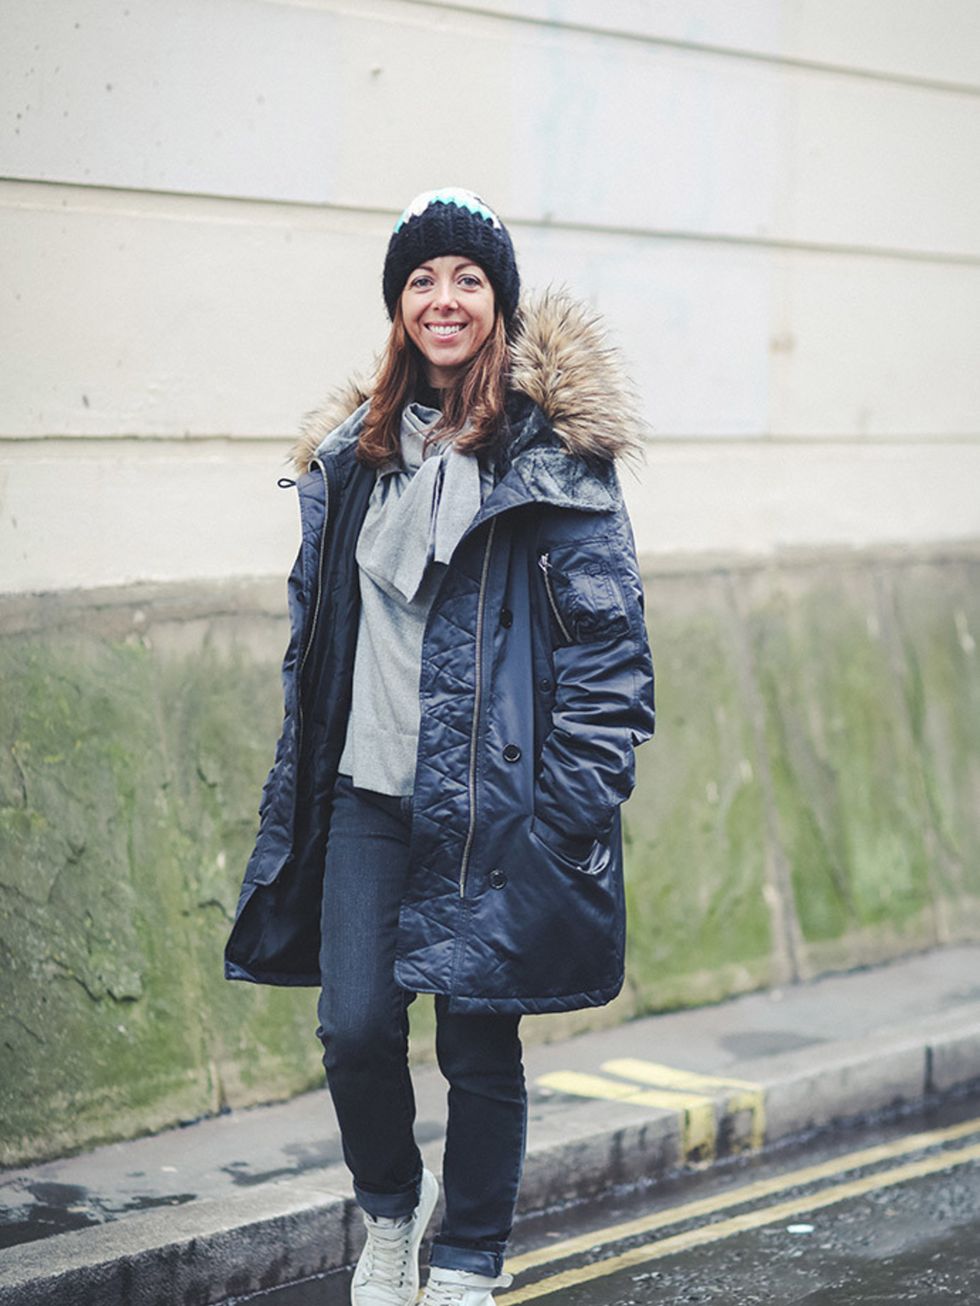 <p>Kirsty Dale  Executive Fashion Director.</p>

<p>Wool And The Gang hat, Gap coat, French Connection top, DL 1961 jeans, Chloe purse and Whistles trainers. </p>

<p> </p>